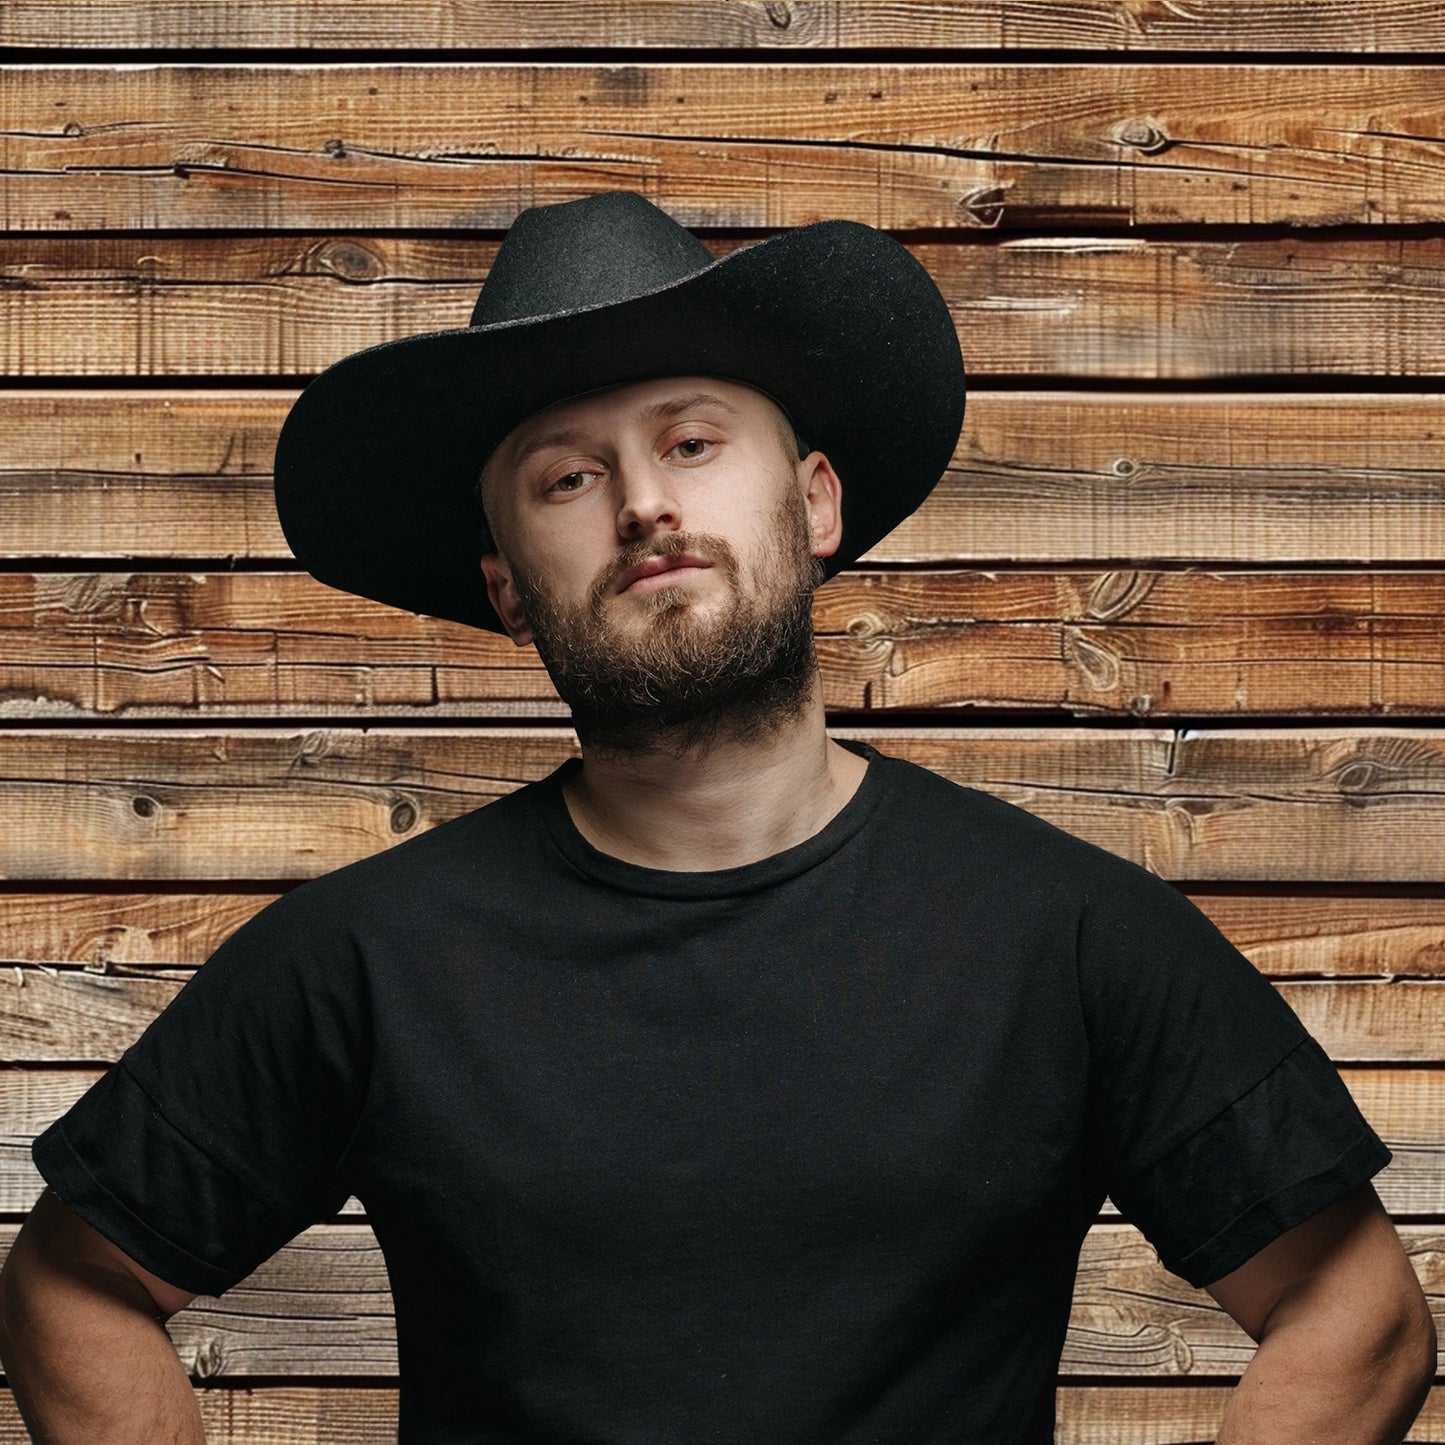 Man with a beard and mustache, dressed in a black t-shirt and black cowboy hat, stands in front of an ideasbackdrop 7x5ft Wood Backdrops for Photography Worn Wooden Boards Background Brown Photo Wall Photo Studio, perfect for high-resolution printing.